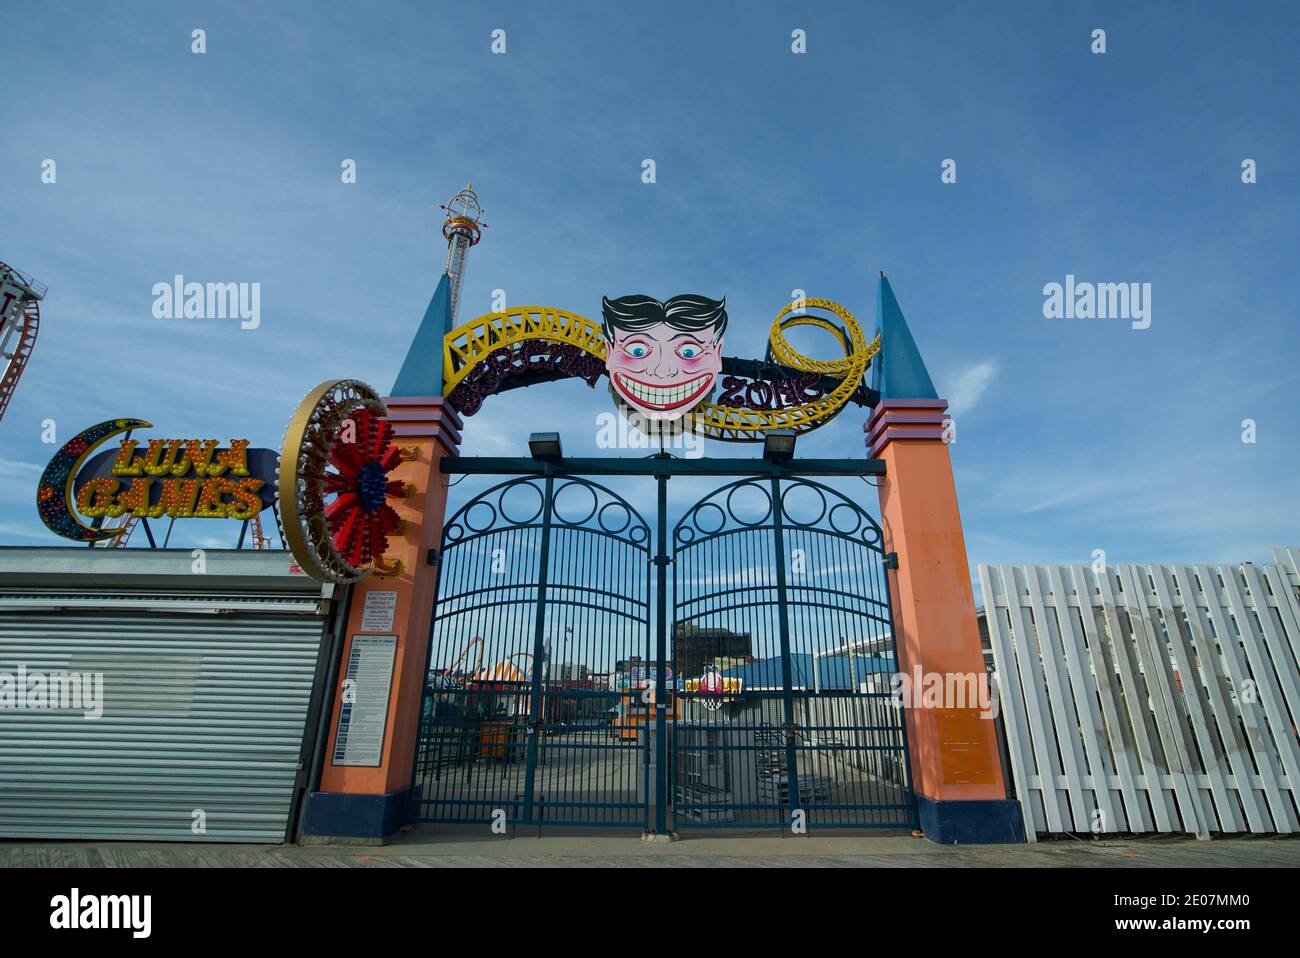 Entrance gate to Coney Island Scream Zone, New York, Amusement Park, showing the smiling man AKA The Steeplechase Face or 'Tillie'. Stock Photo